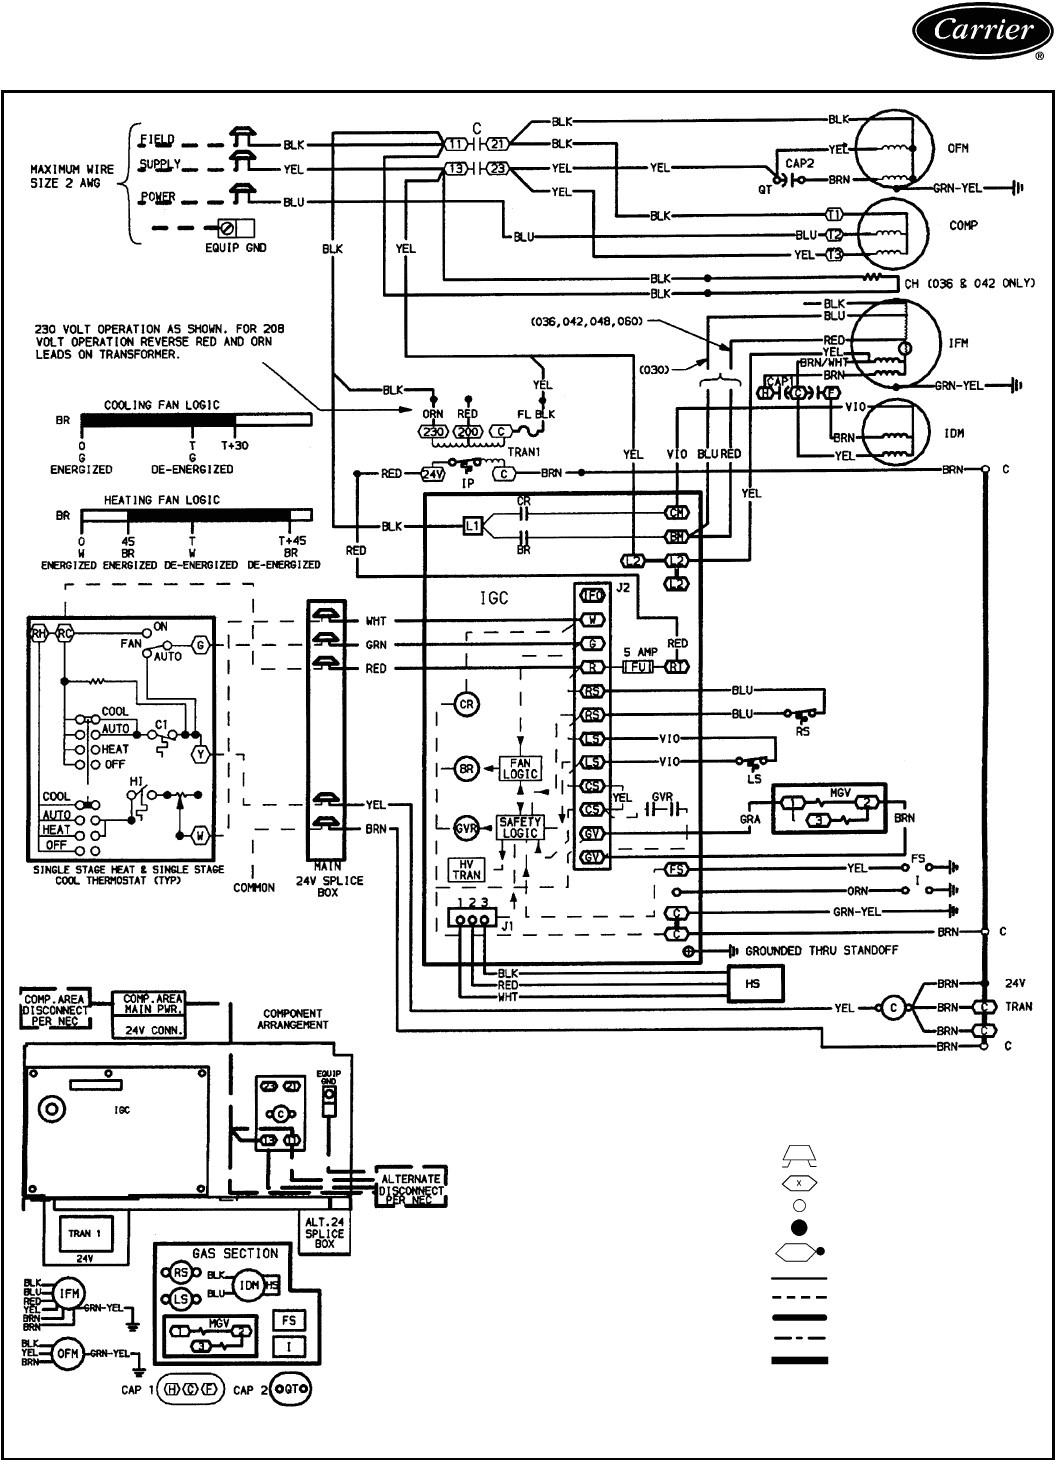 carrier infinity thermostat wiring diagram carrier wiring diagrams blurts wiring diagram collection of carrier infinity